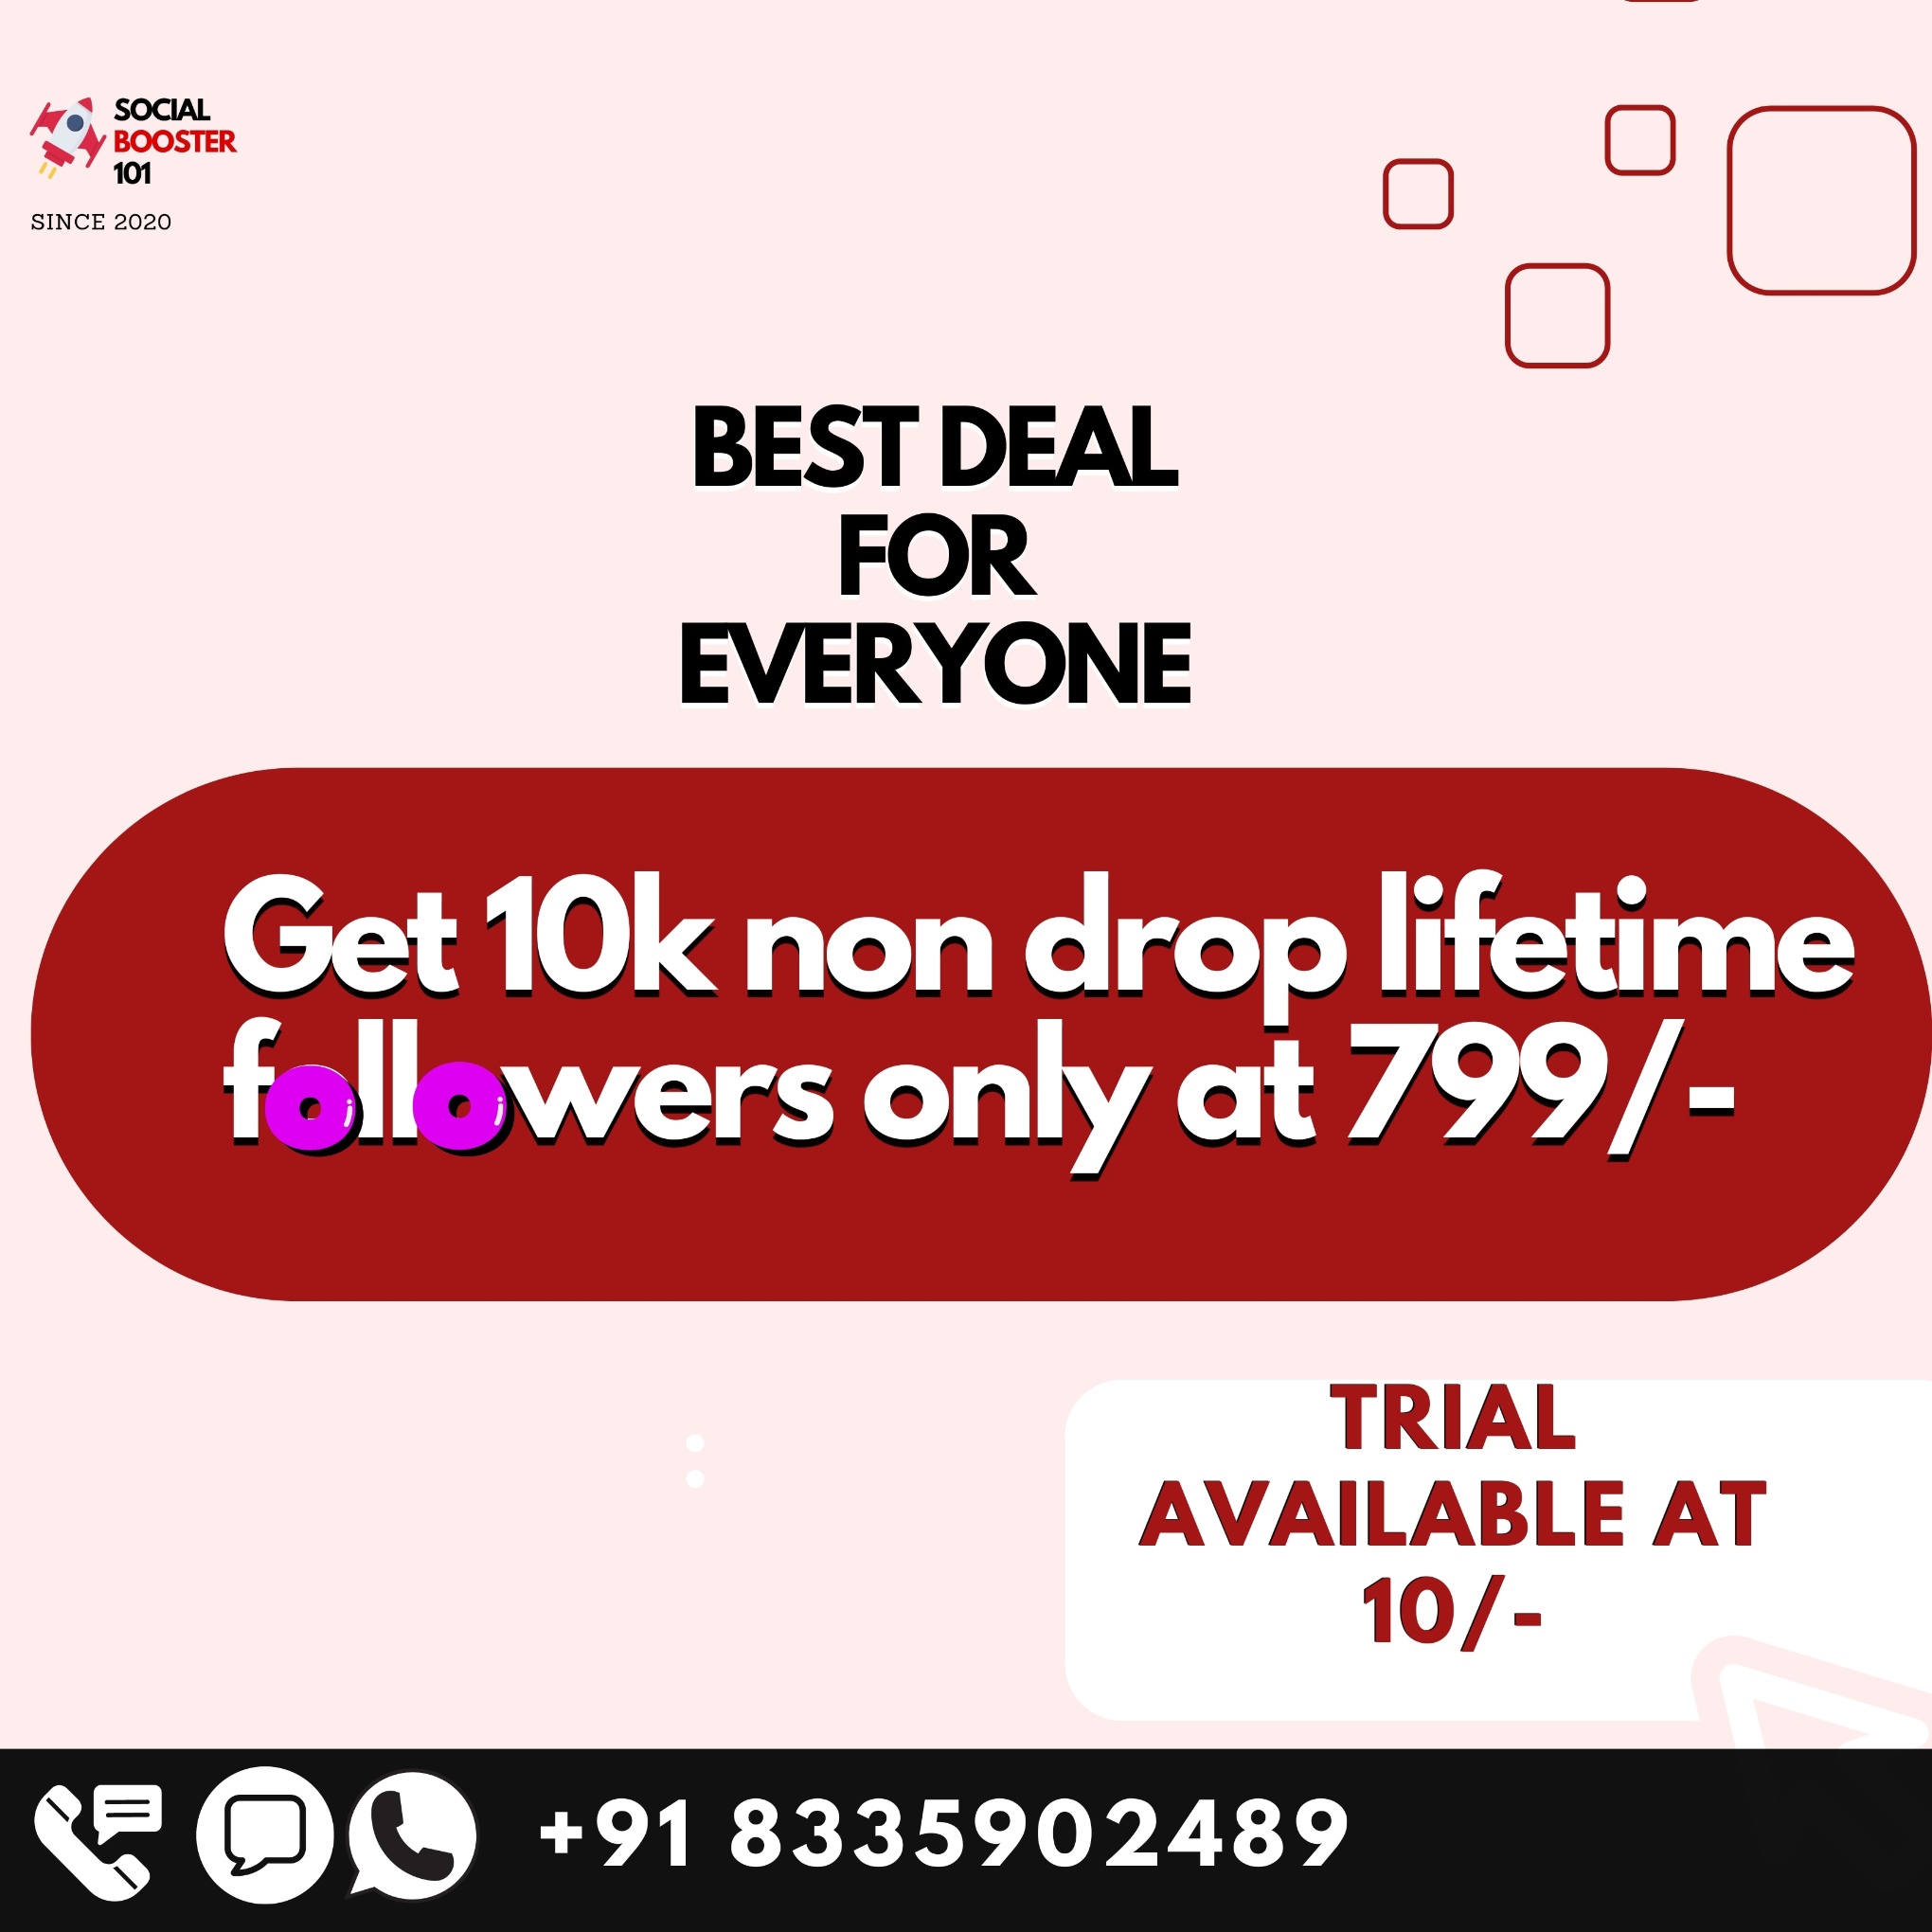 Get 10k non drop lifetime Instagram followers only at 799/-